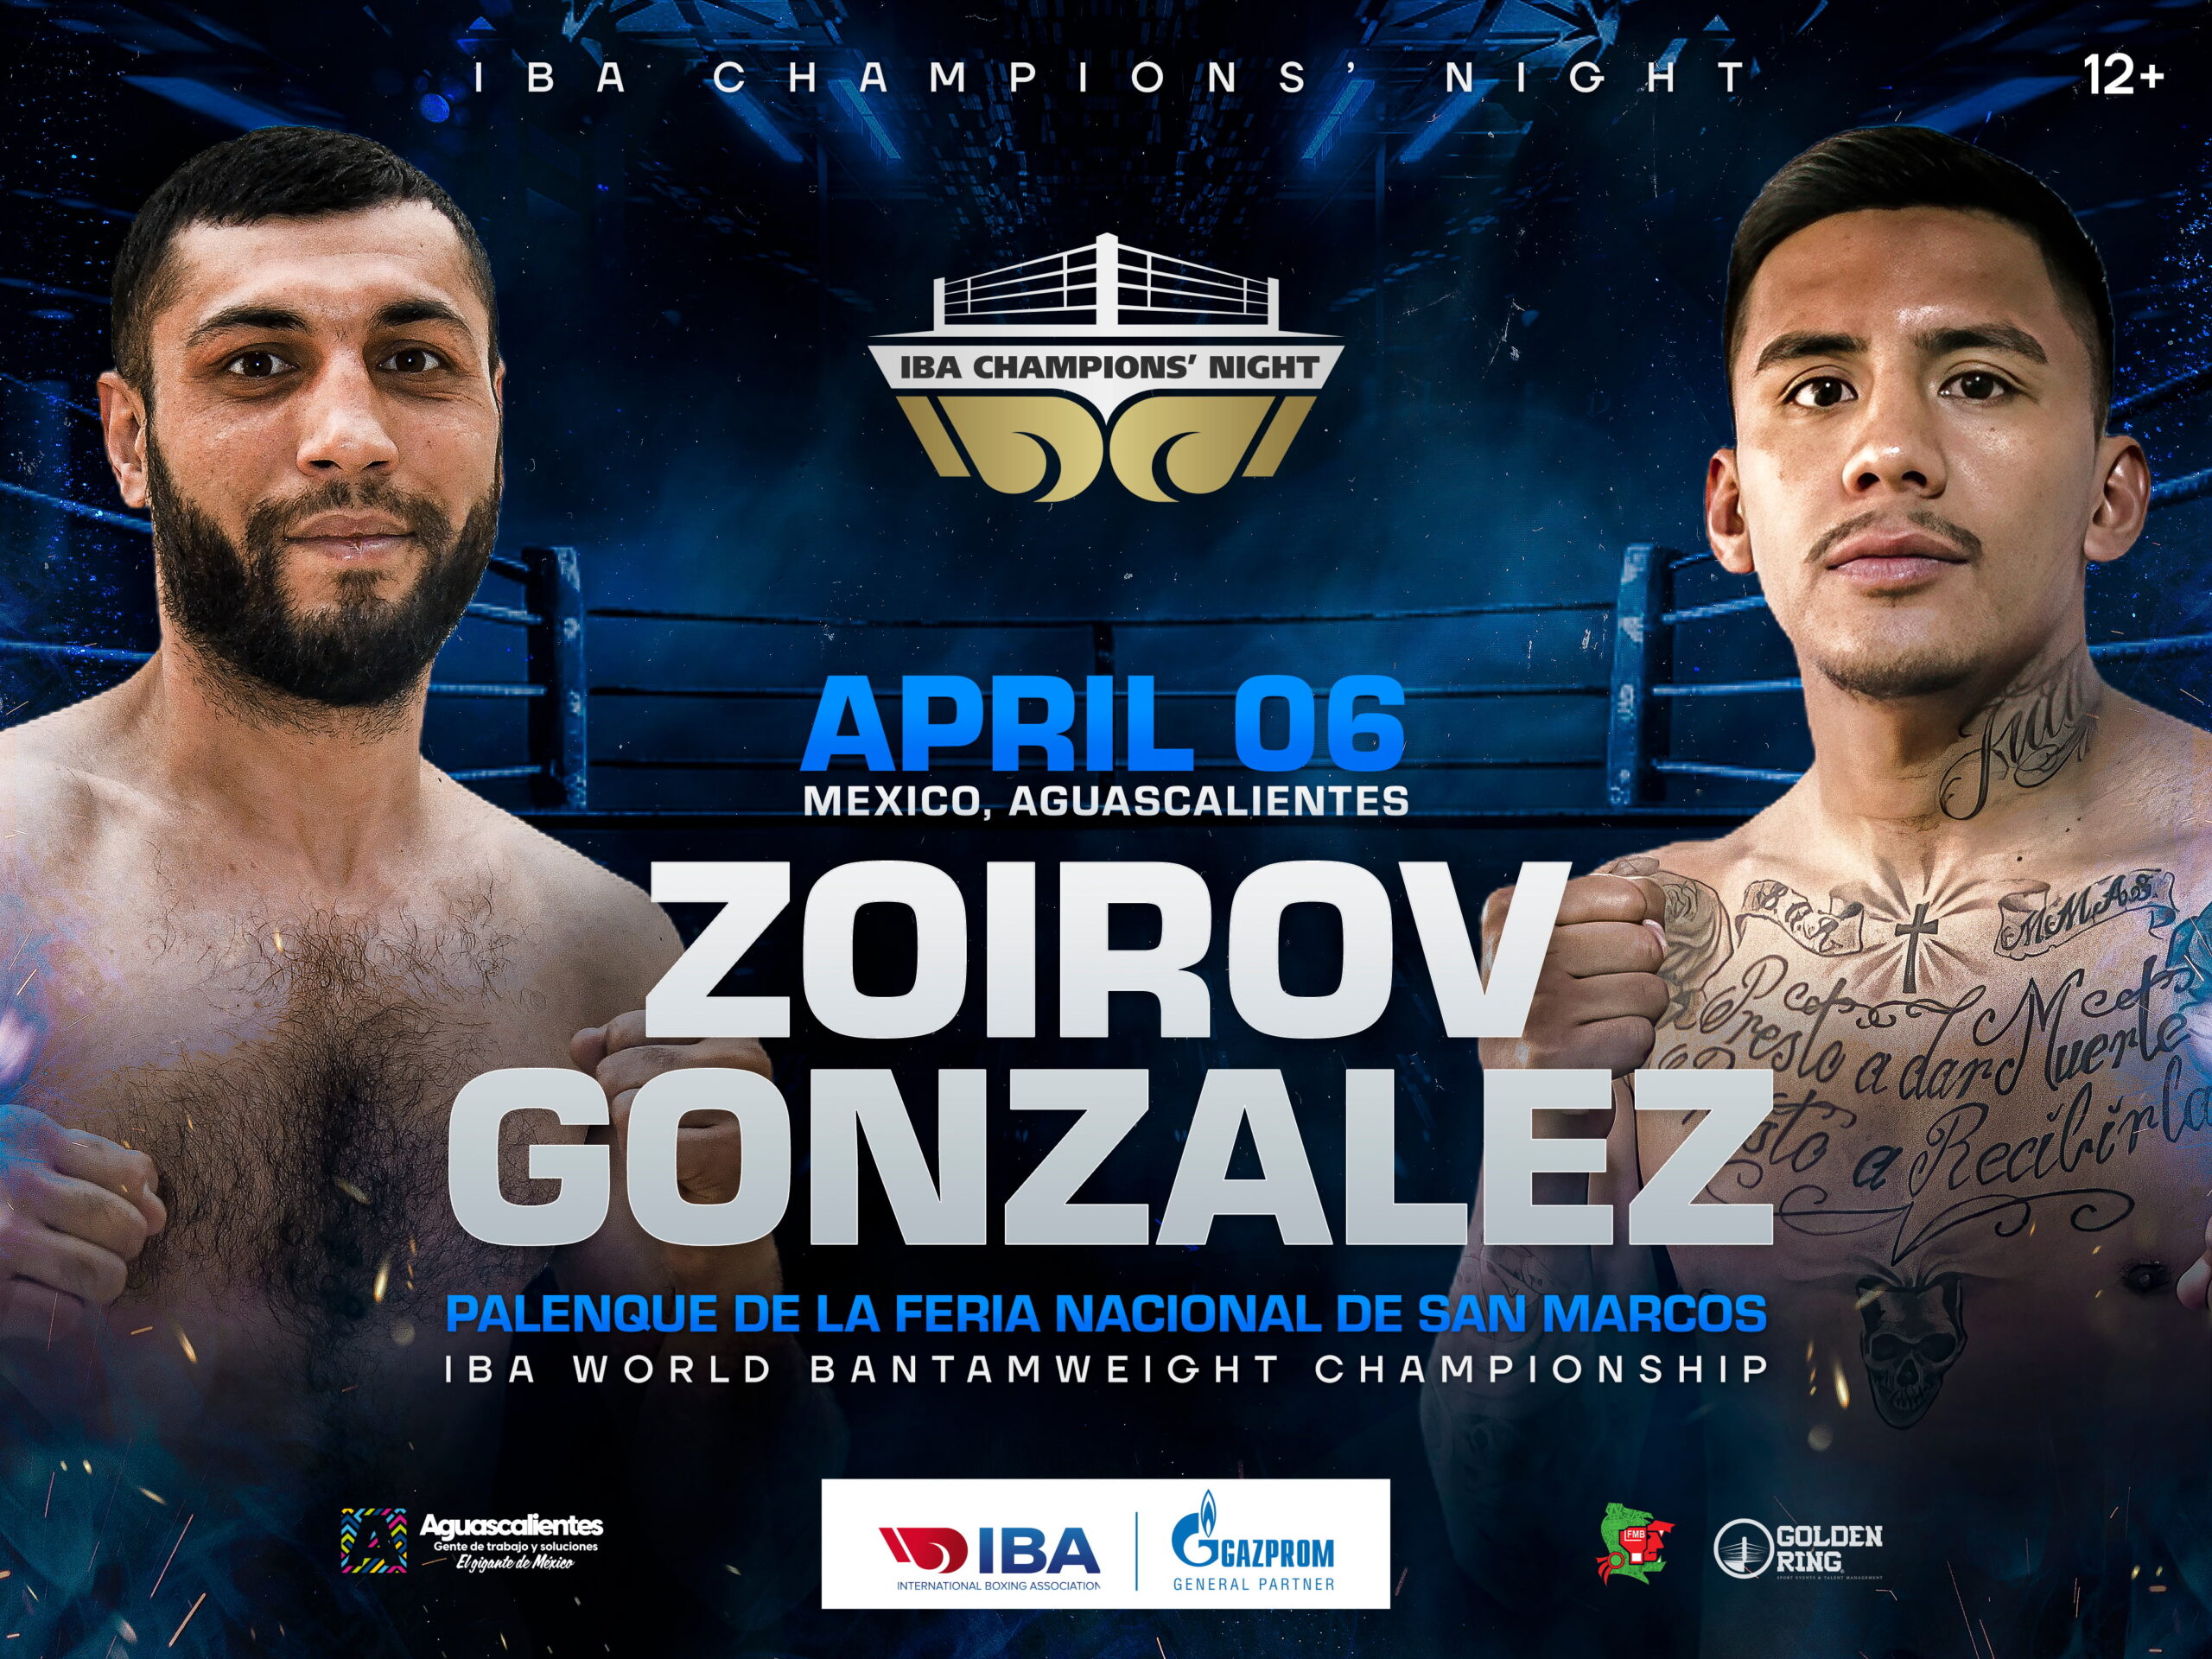 IBA Champions’ Night to feature title fight between Israel Gonzalez and Shakhobidin Zoirov in Mexico